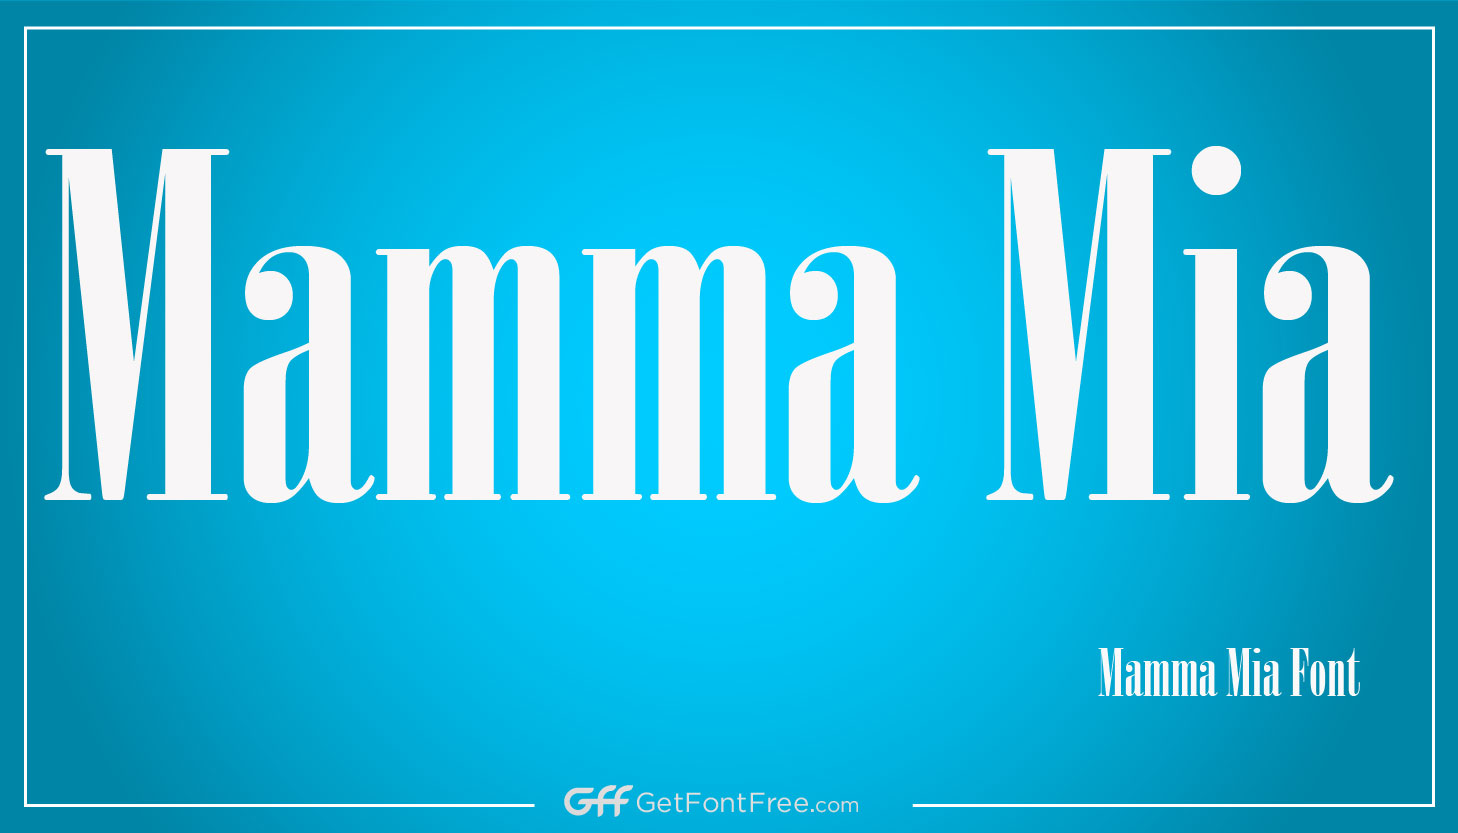 Let's look at the Mamma Mia Font family, which is a very popular and stunning typeface family. Released in 2008, it was a well-known comedy movie. The most creative designer, Shrootleberri, created this elegant typeface. This serif typeface is available in more than 260 different characters, about 255 different glyphs, and other sophisticated and distinctive features. This typeface is quite popular since it comes in so many lovely variations.